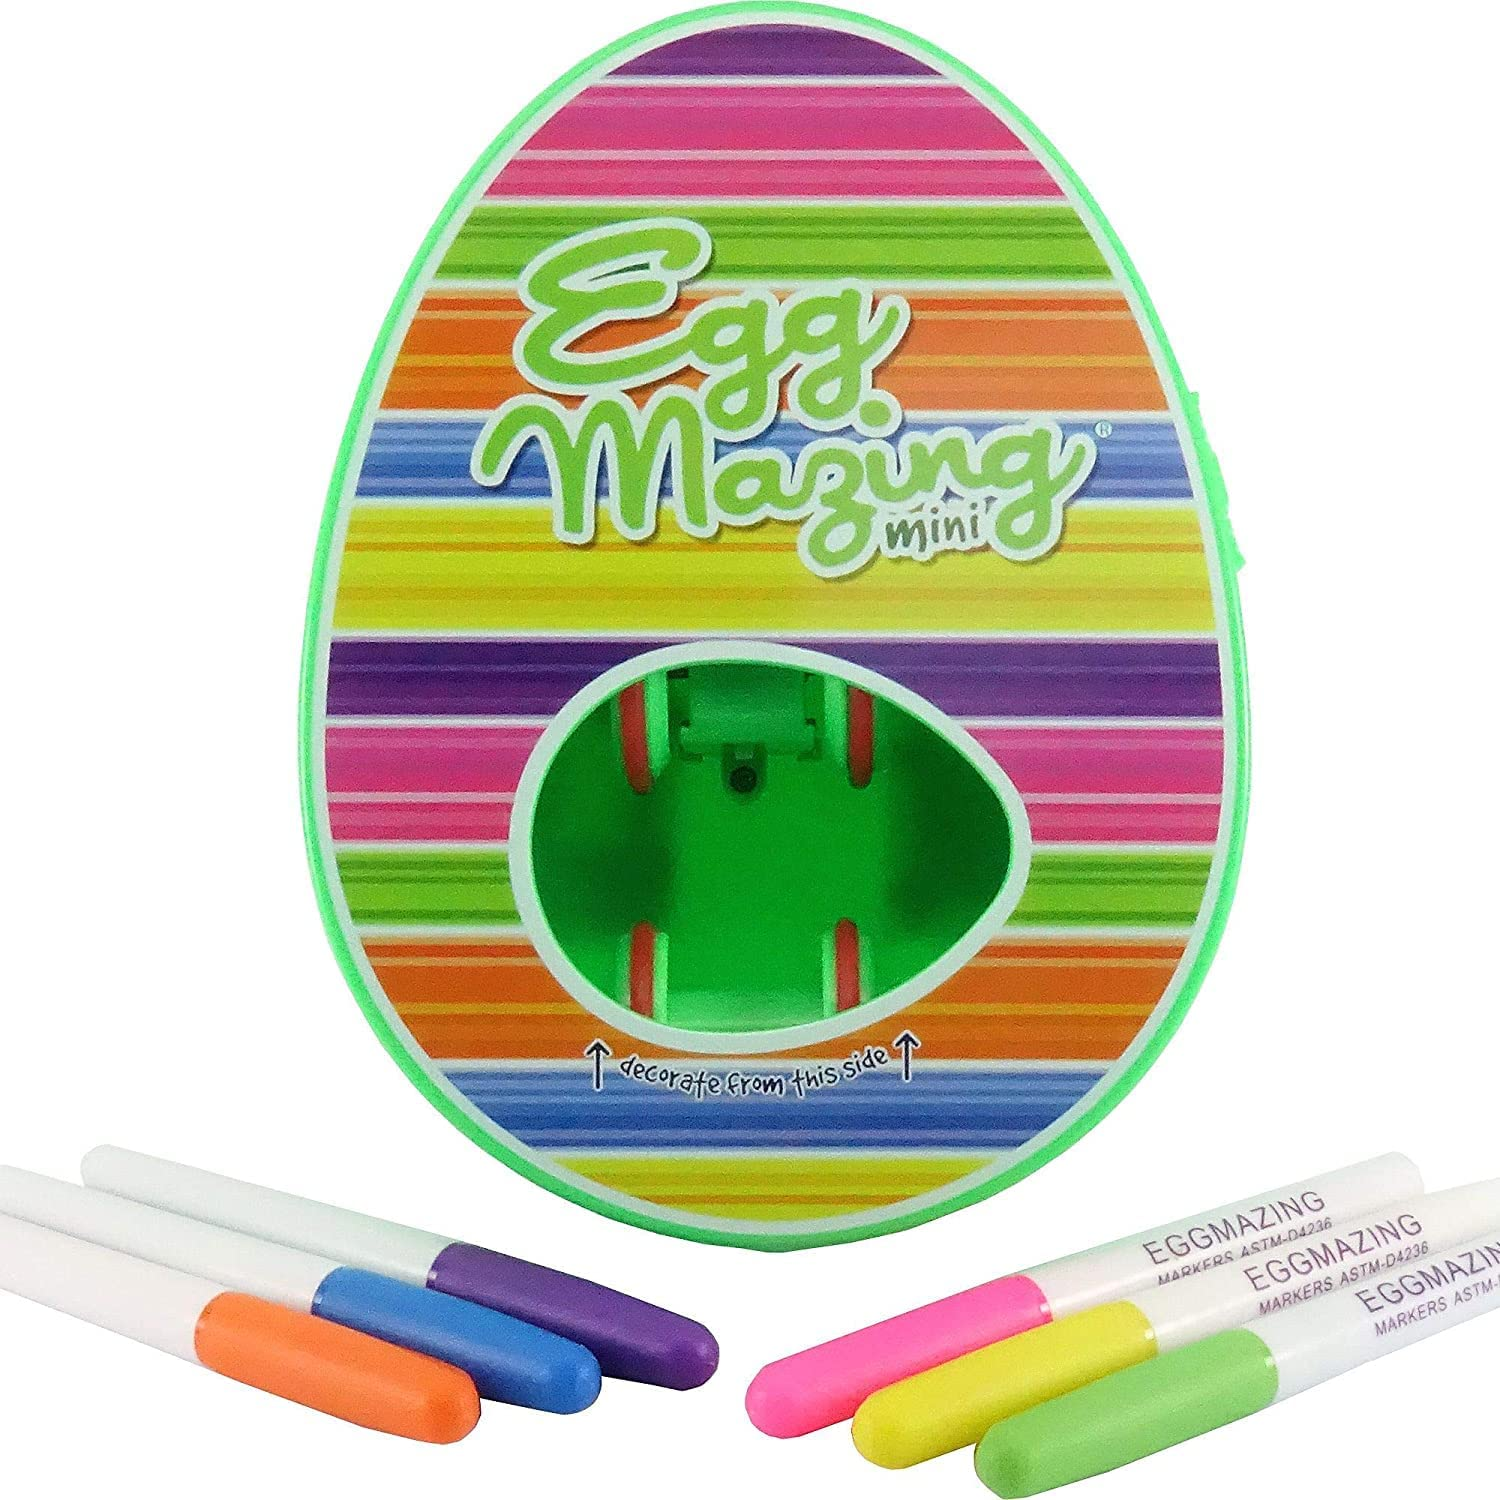 The Eggmazing Easter Egg Mini Decorator Kit Arts and Crafts Set - Includes Egg Decorating Spinner and 6 Markers